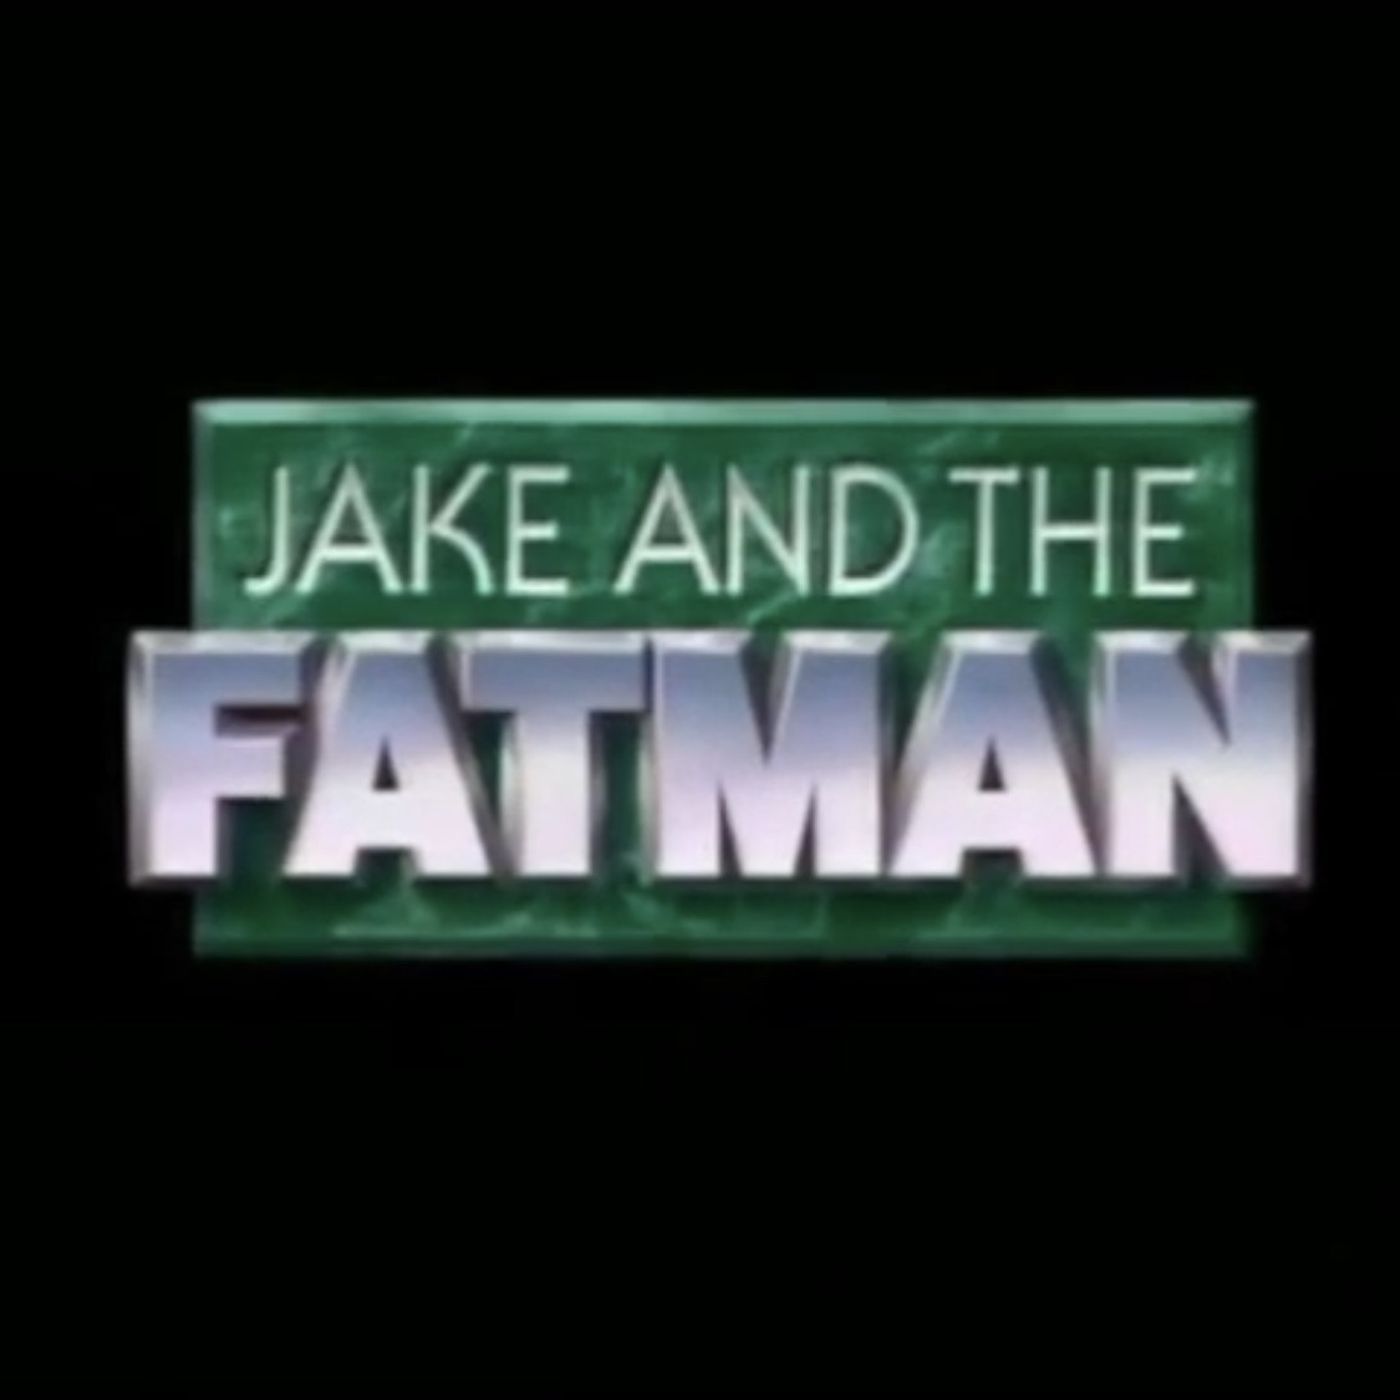 Jake and the Fatman podcast show image